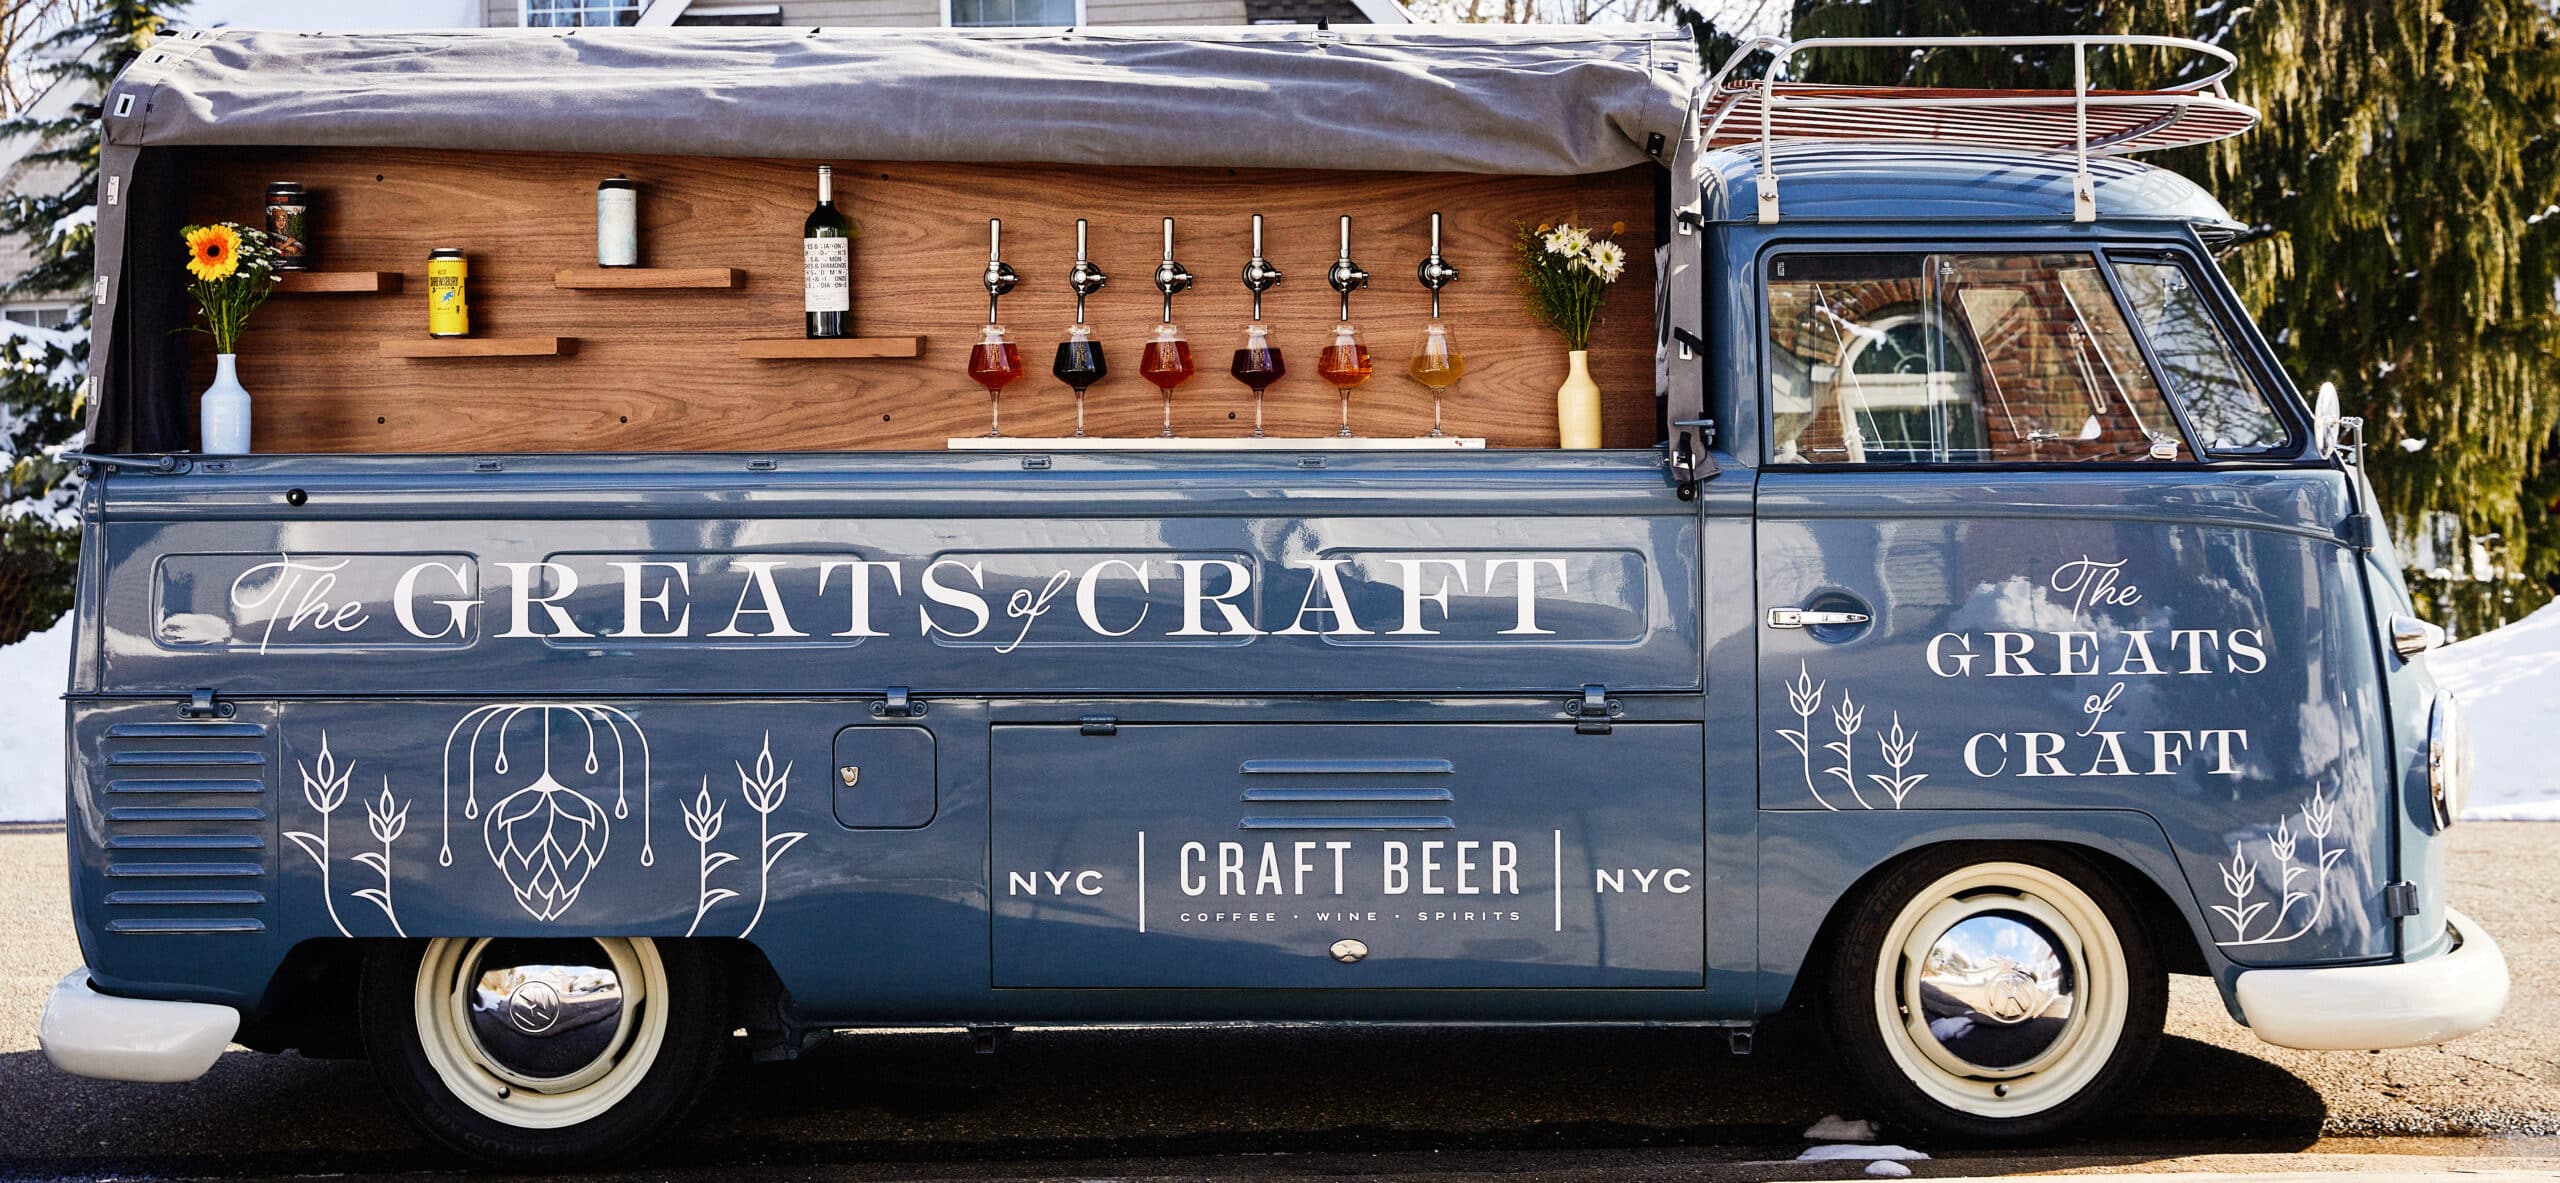 New York City Mobile Bar Greats of Craft